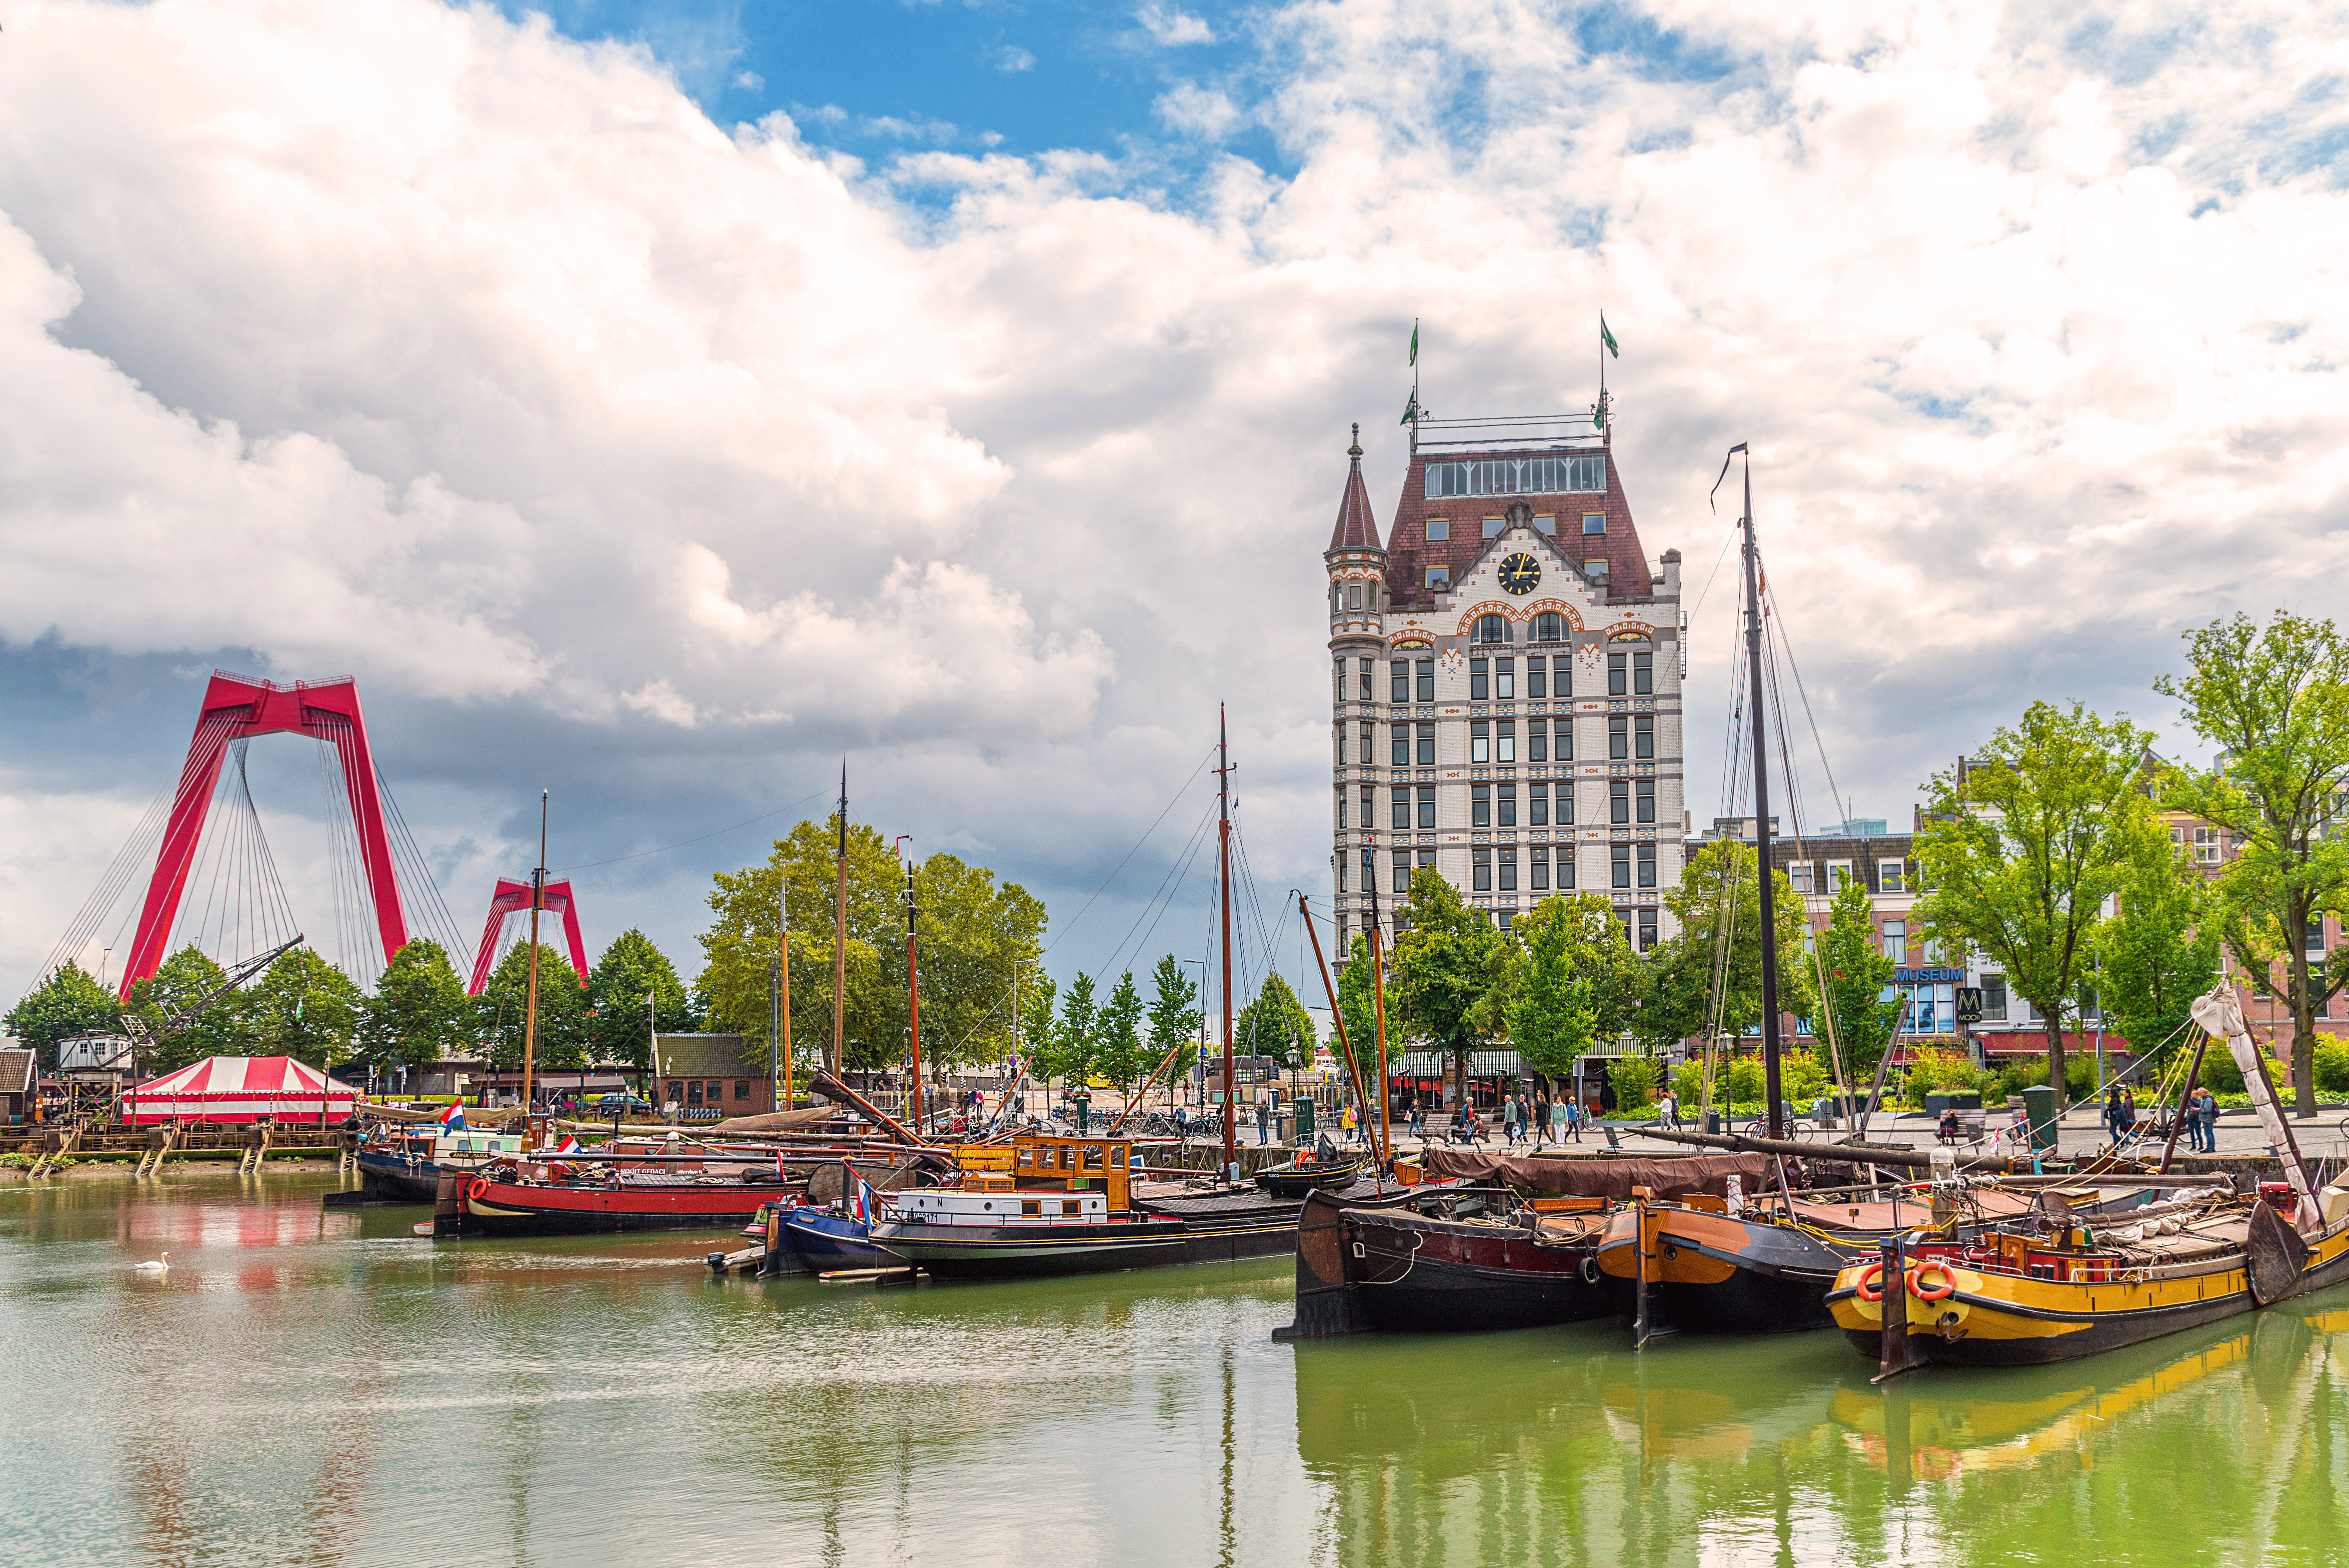 Rotterdam offers stunning architecture, with its Old Harbour a must-see for anyone visiting